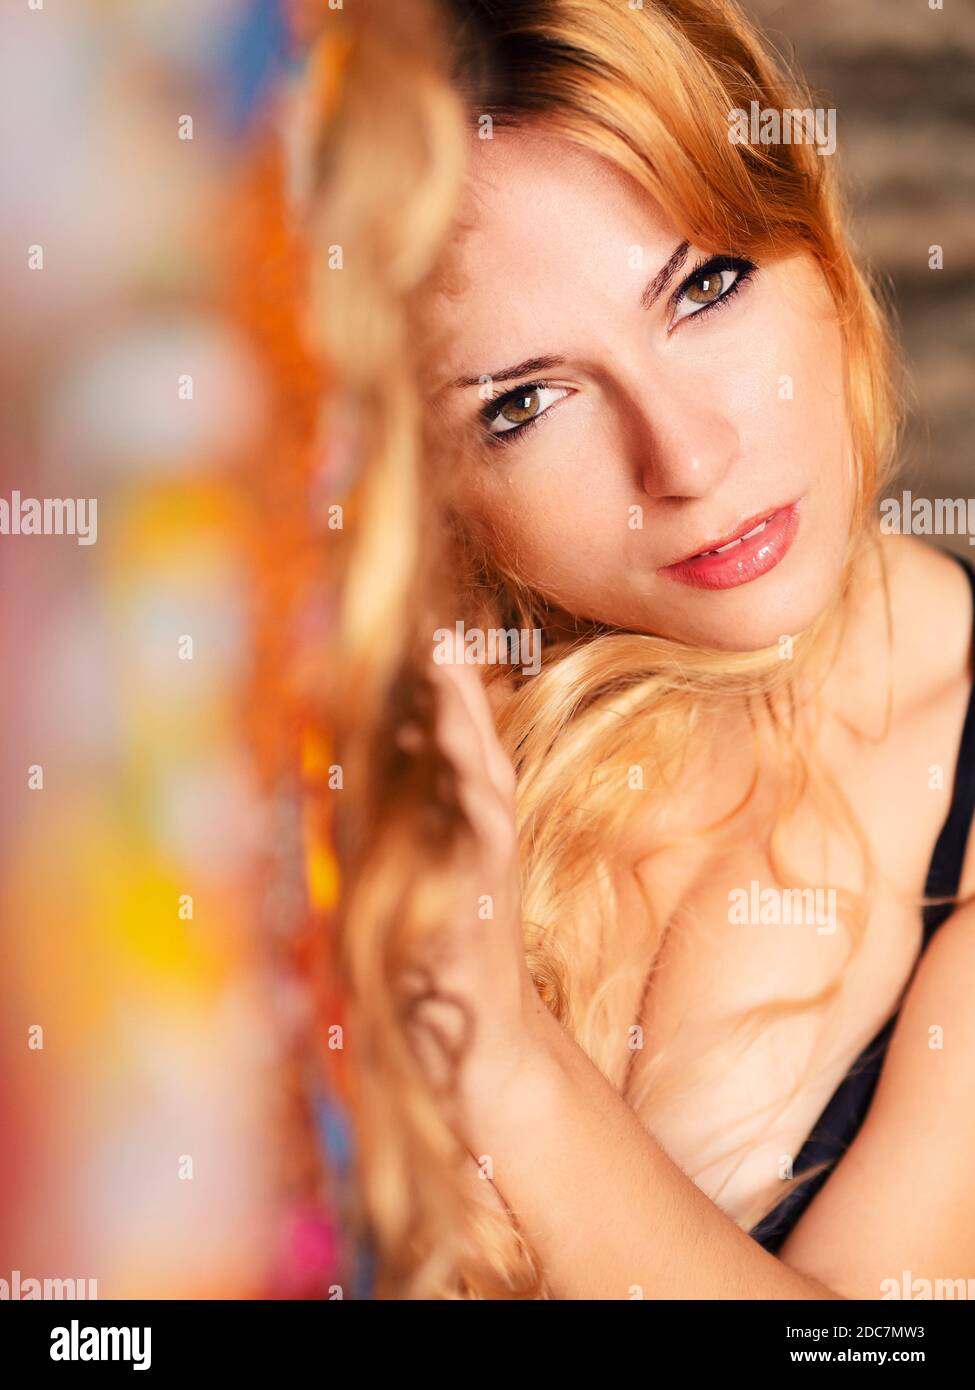 Young woman with long blond hair lying on bed, looking at camera Stock Photo